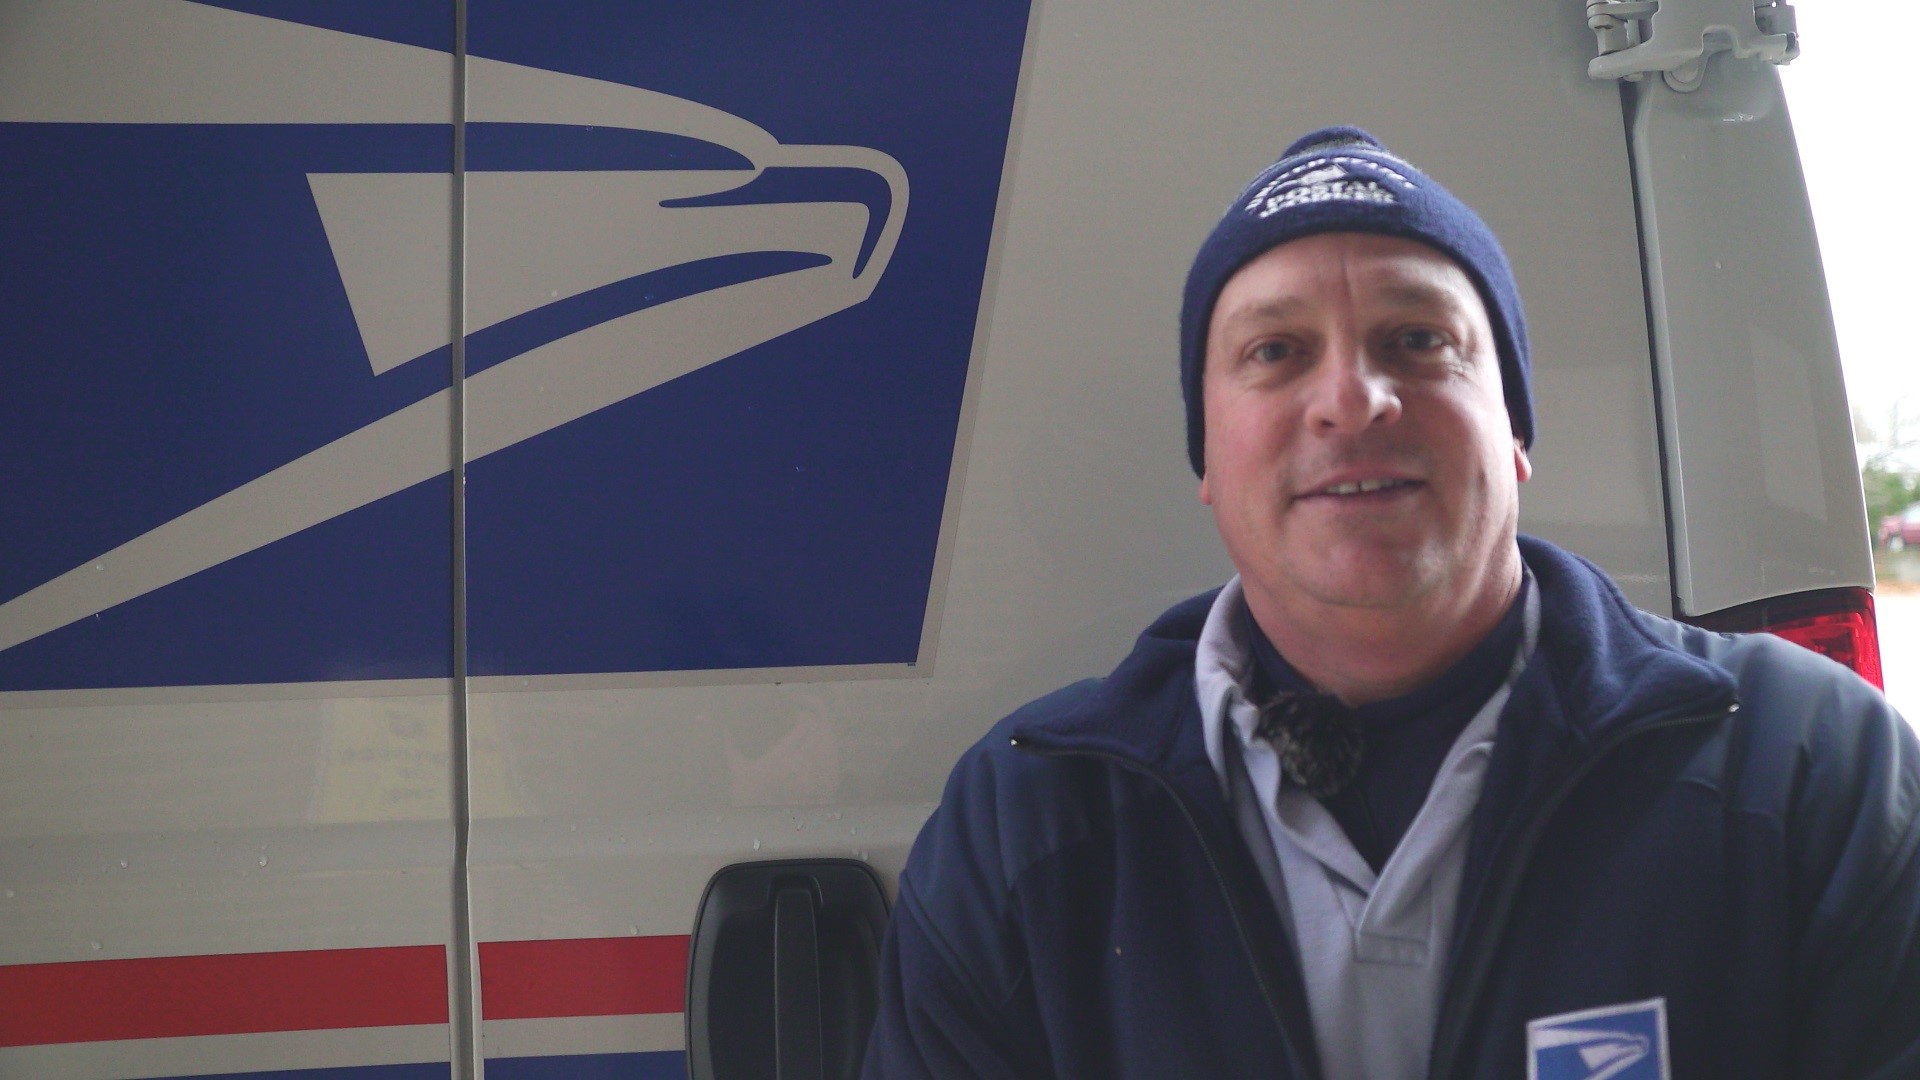 Hardworking Cleveland is a WKYC digital web-series about Clevelanders hard at work. This story is with Steve Sullenberger, a USPS mail carrier in Lakewood OH.